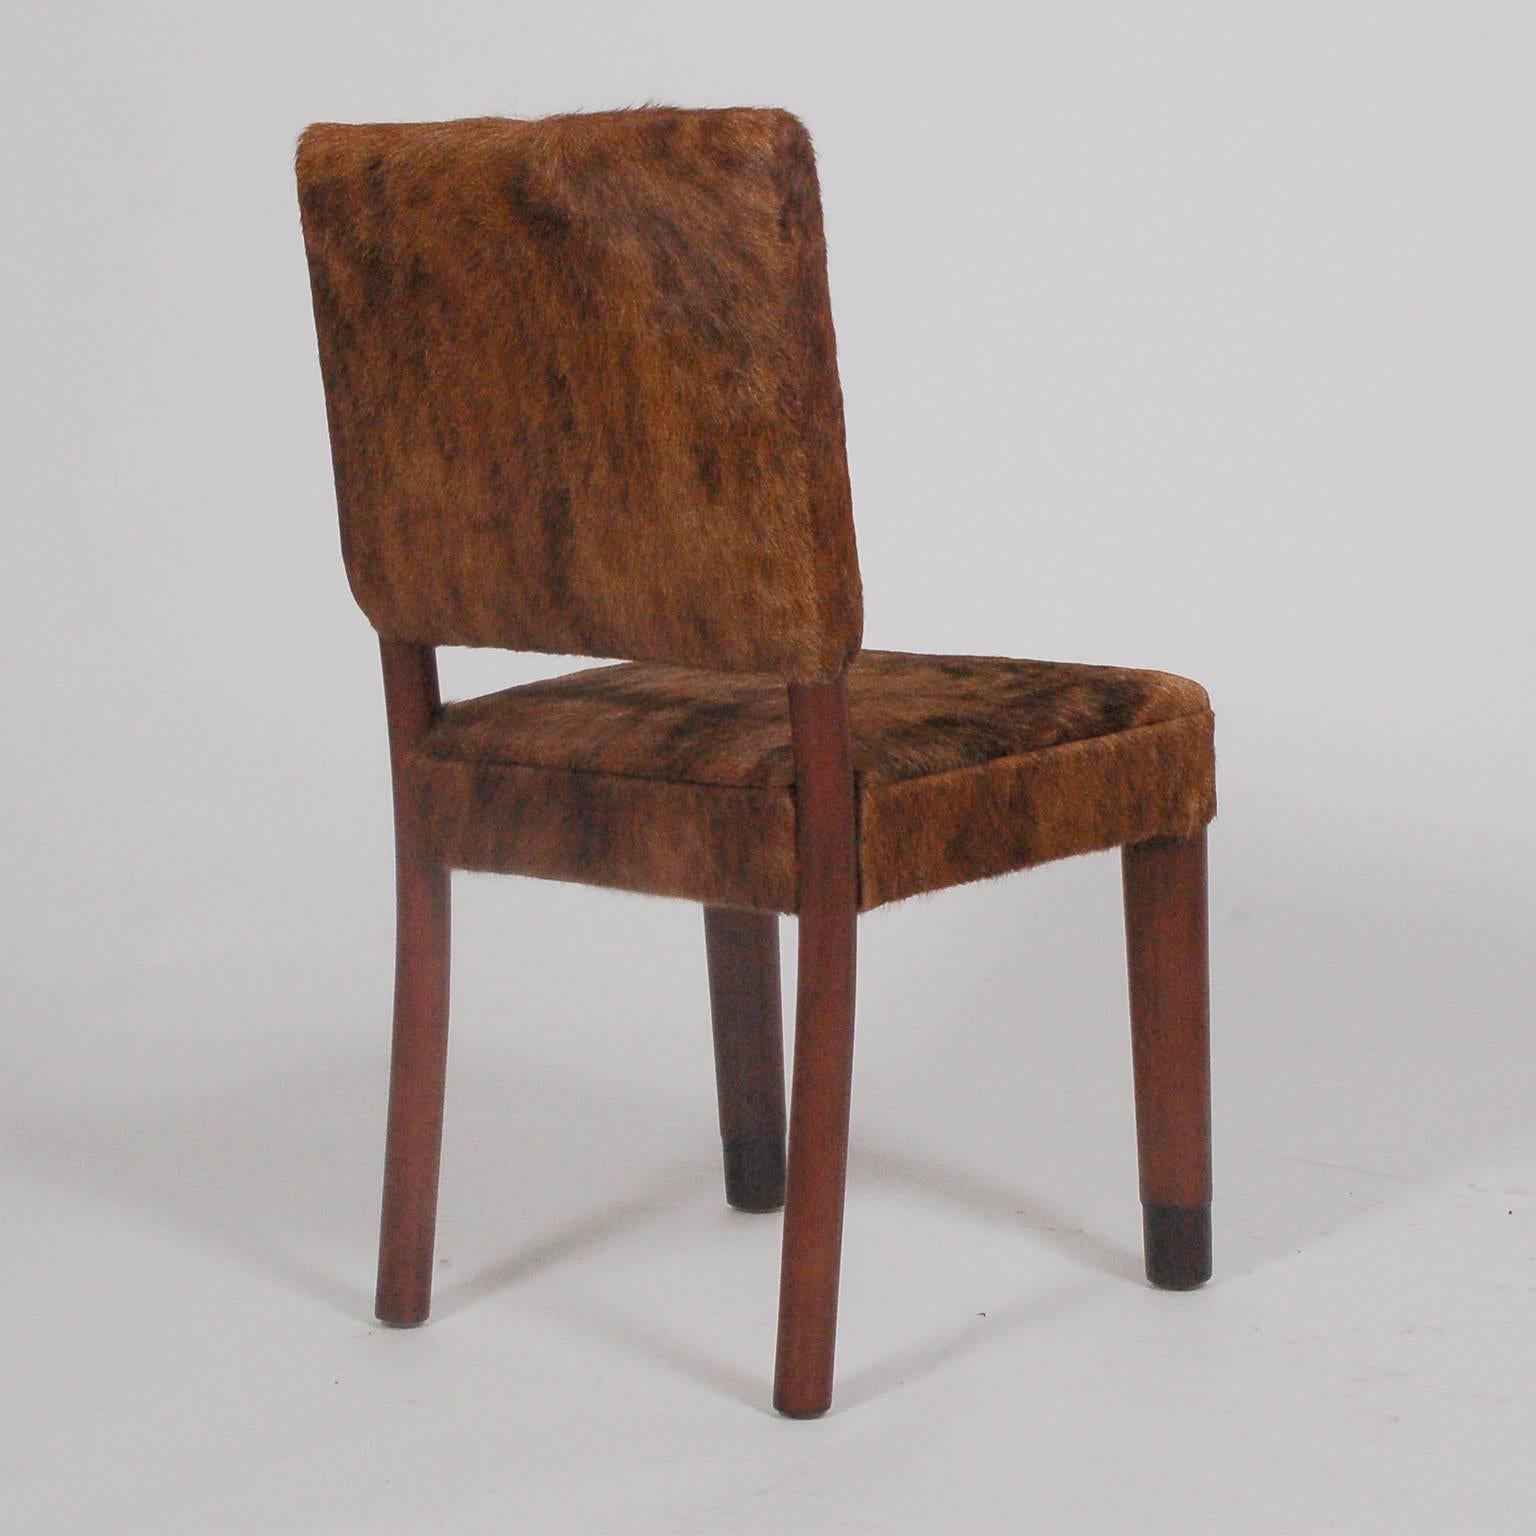 Armless occasional chair with rounded front legs and curving back legs made of stained maple. Newly upholstered in cowhide. Made by Cavalier.